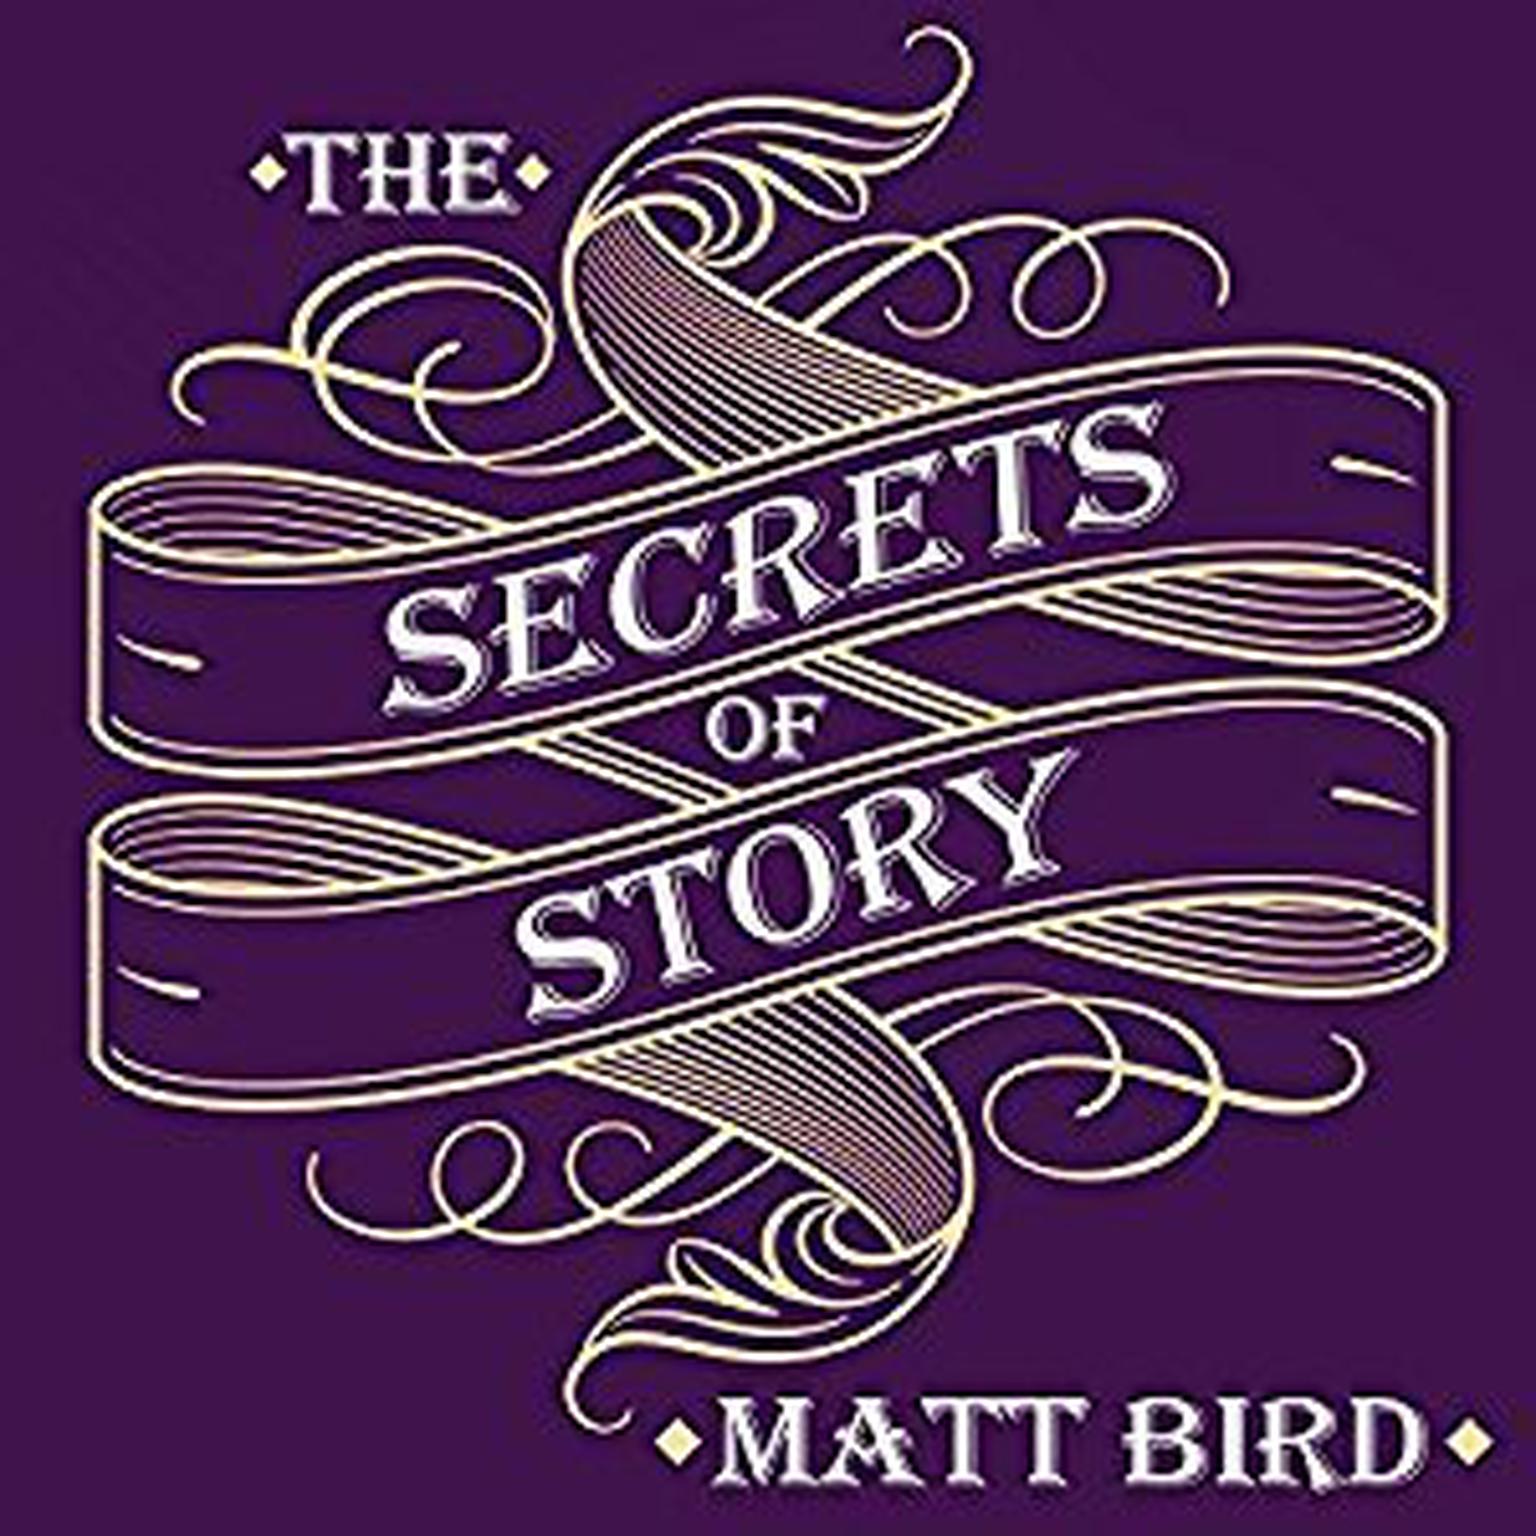 The Secrets of Story: Innovative Tools for Perfecting Your Fiction and Captivating Readers Audiobook, by Matt Bird